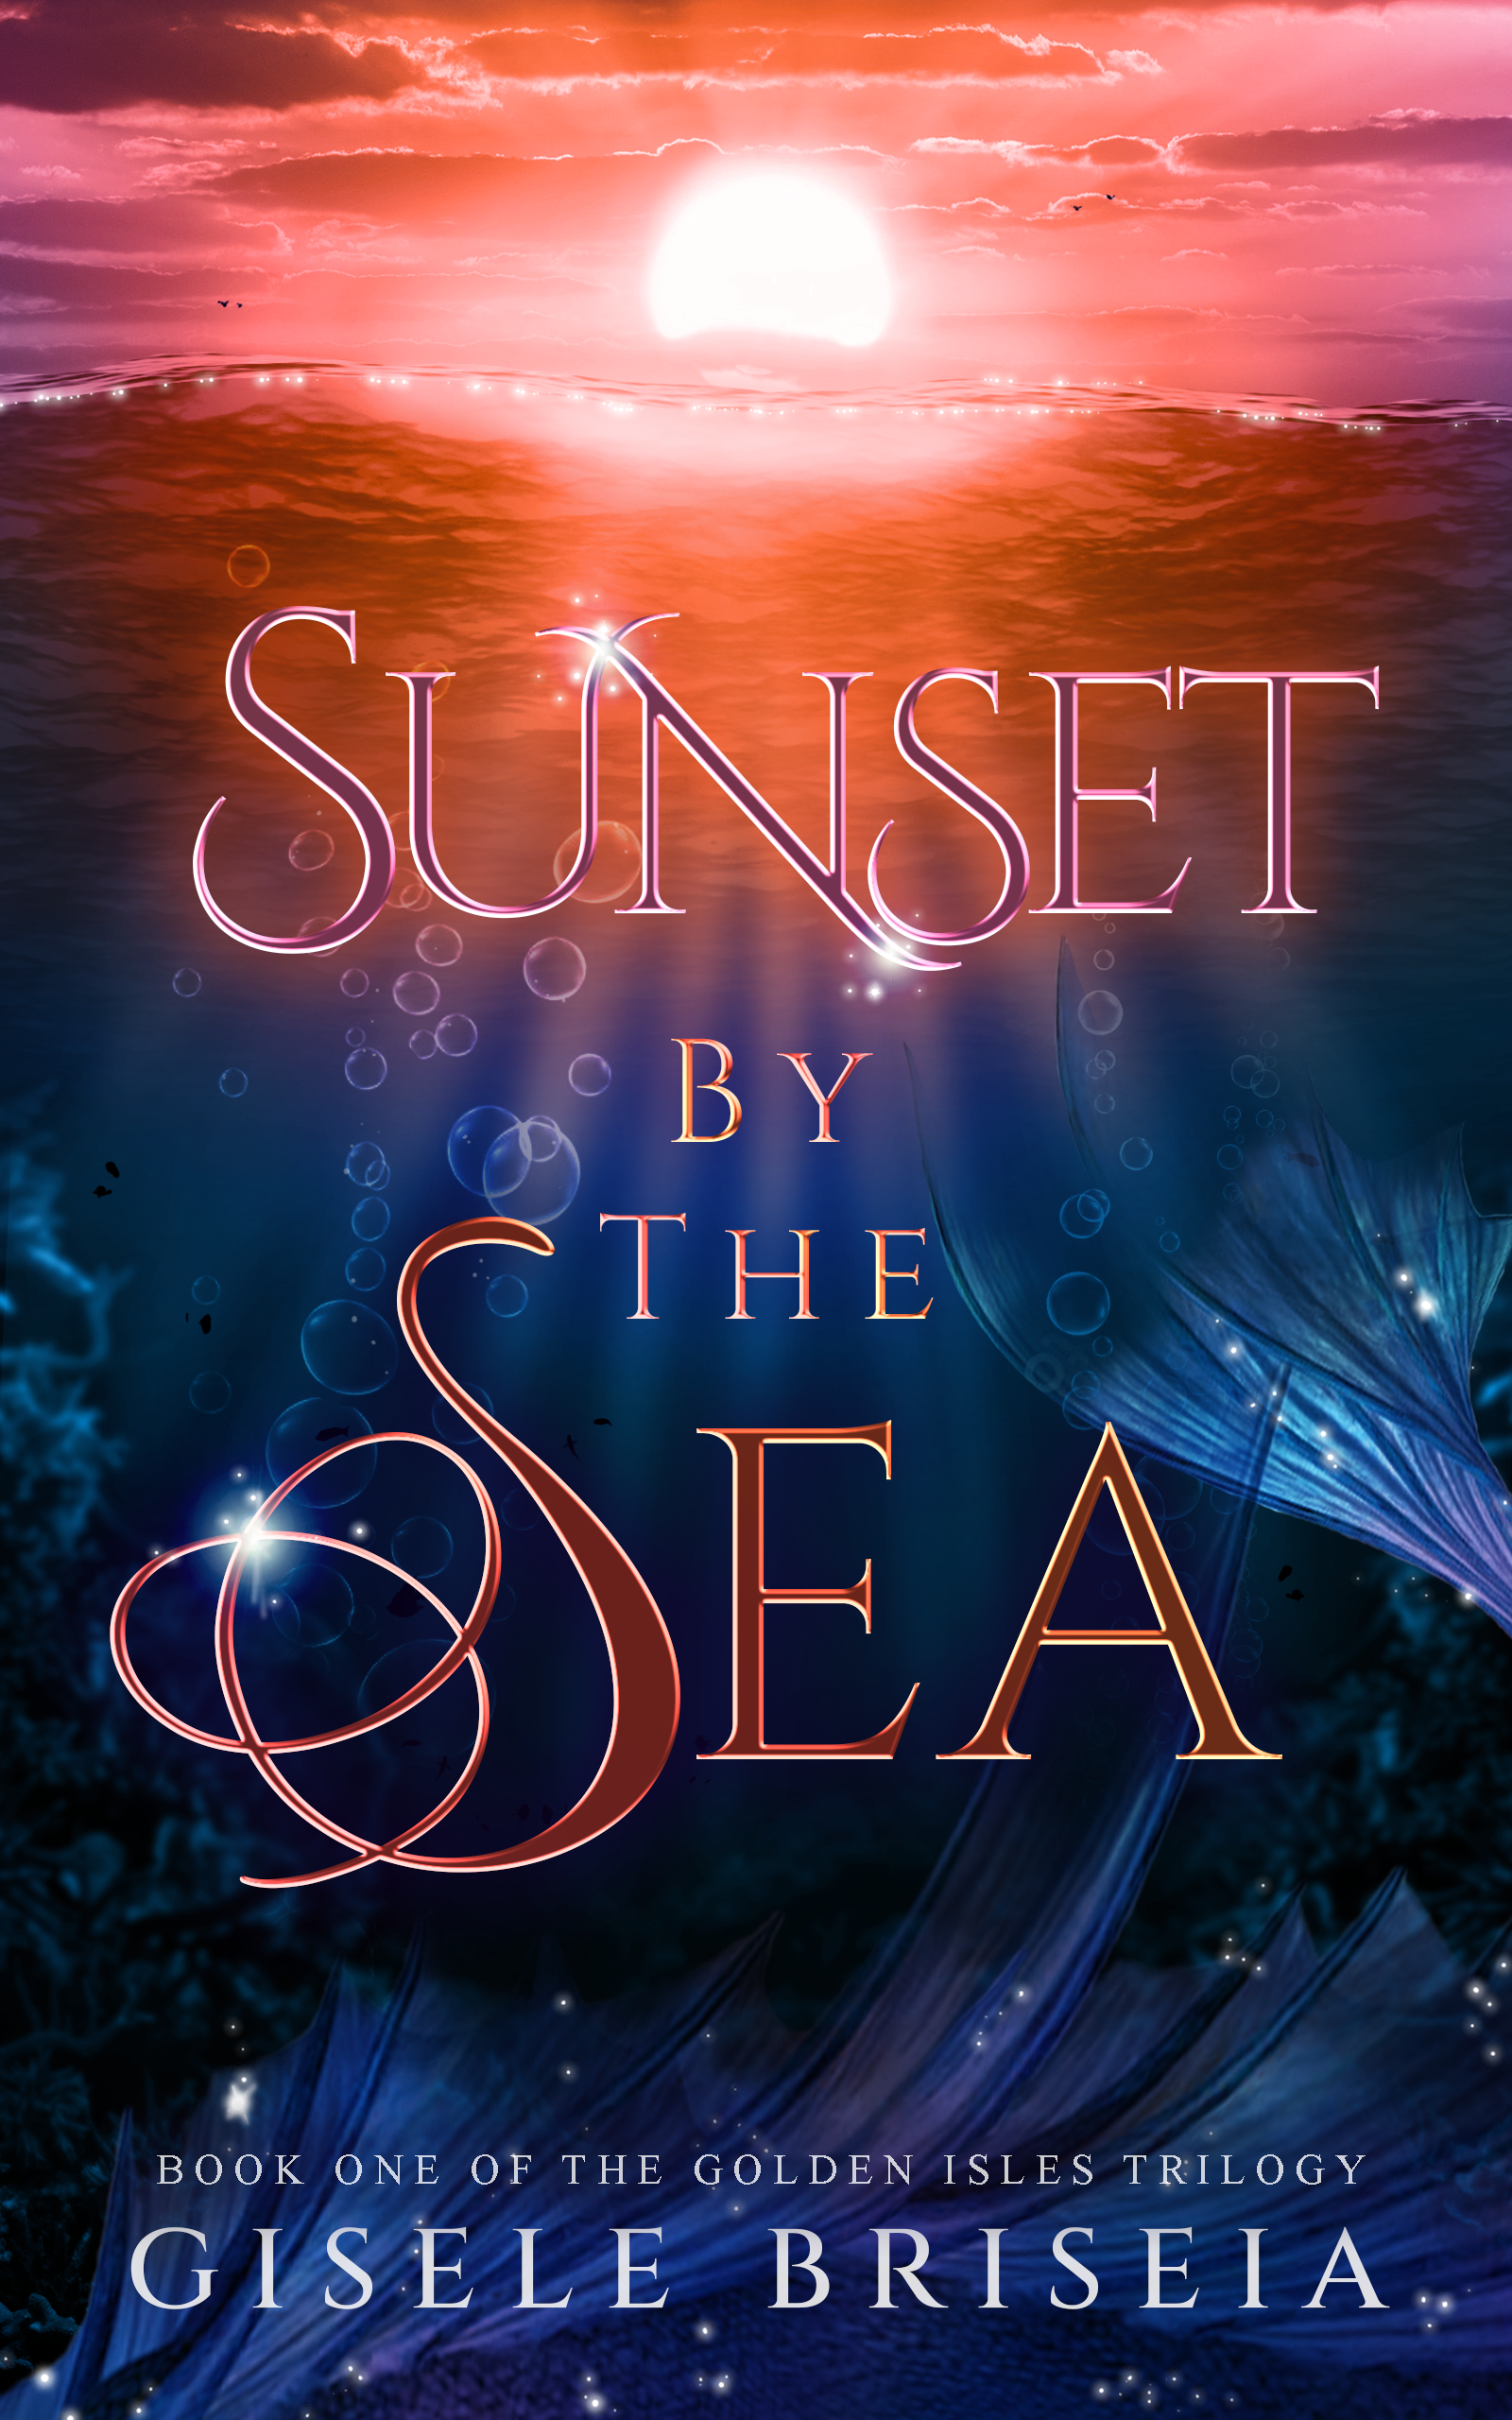 Cover image for Sunset by the Sea: The Golden Isles trilogy book 1 by Gisele Briseia featuring a sunset over the ocean and a mermaid tail 